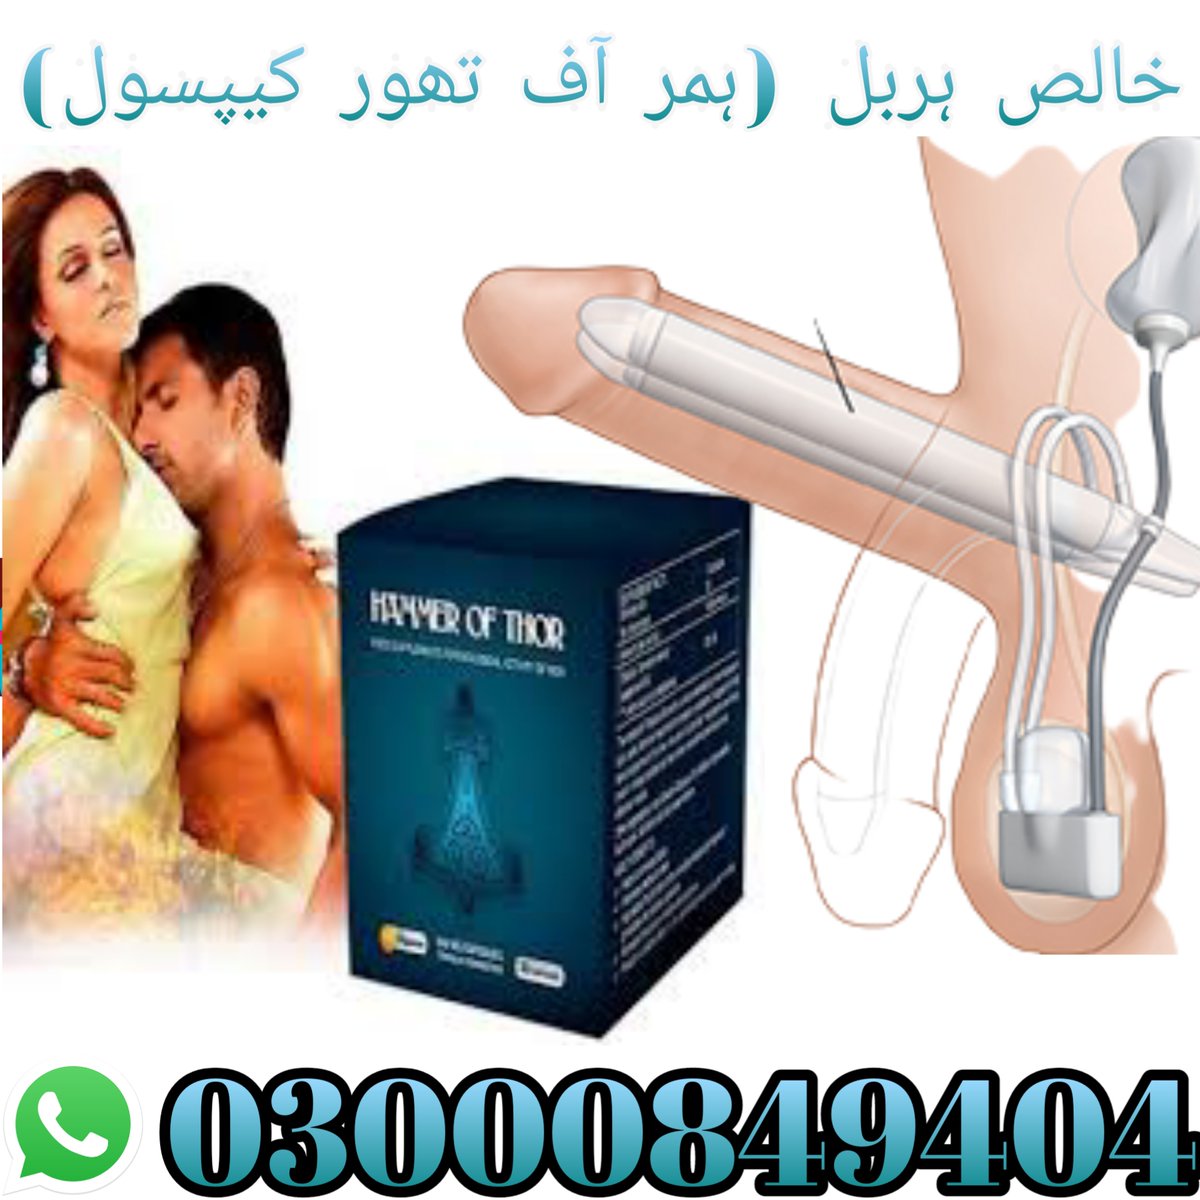 Hammer Of Thor Price in Khairpur-03000849404 https://t.co/w6B3O41deY